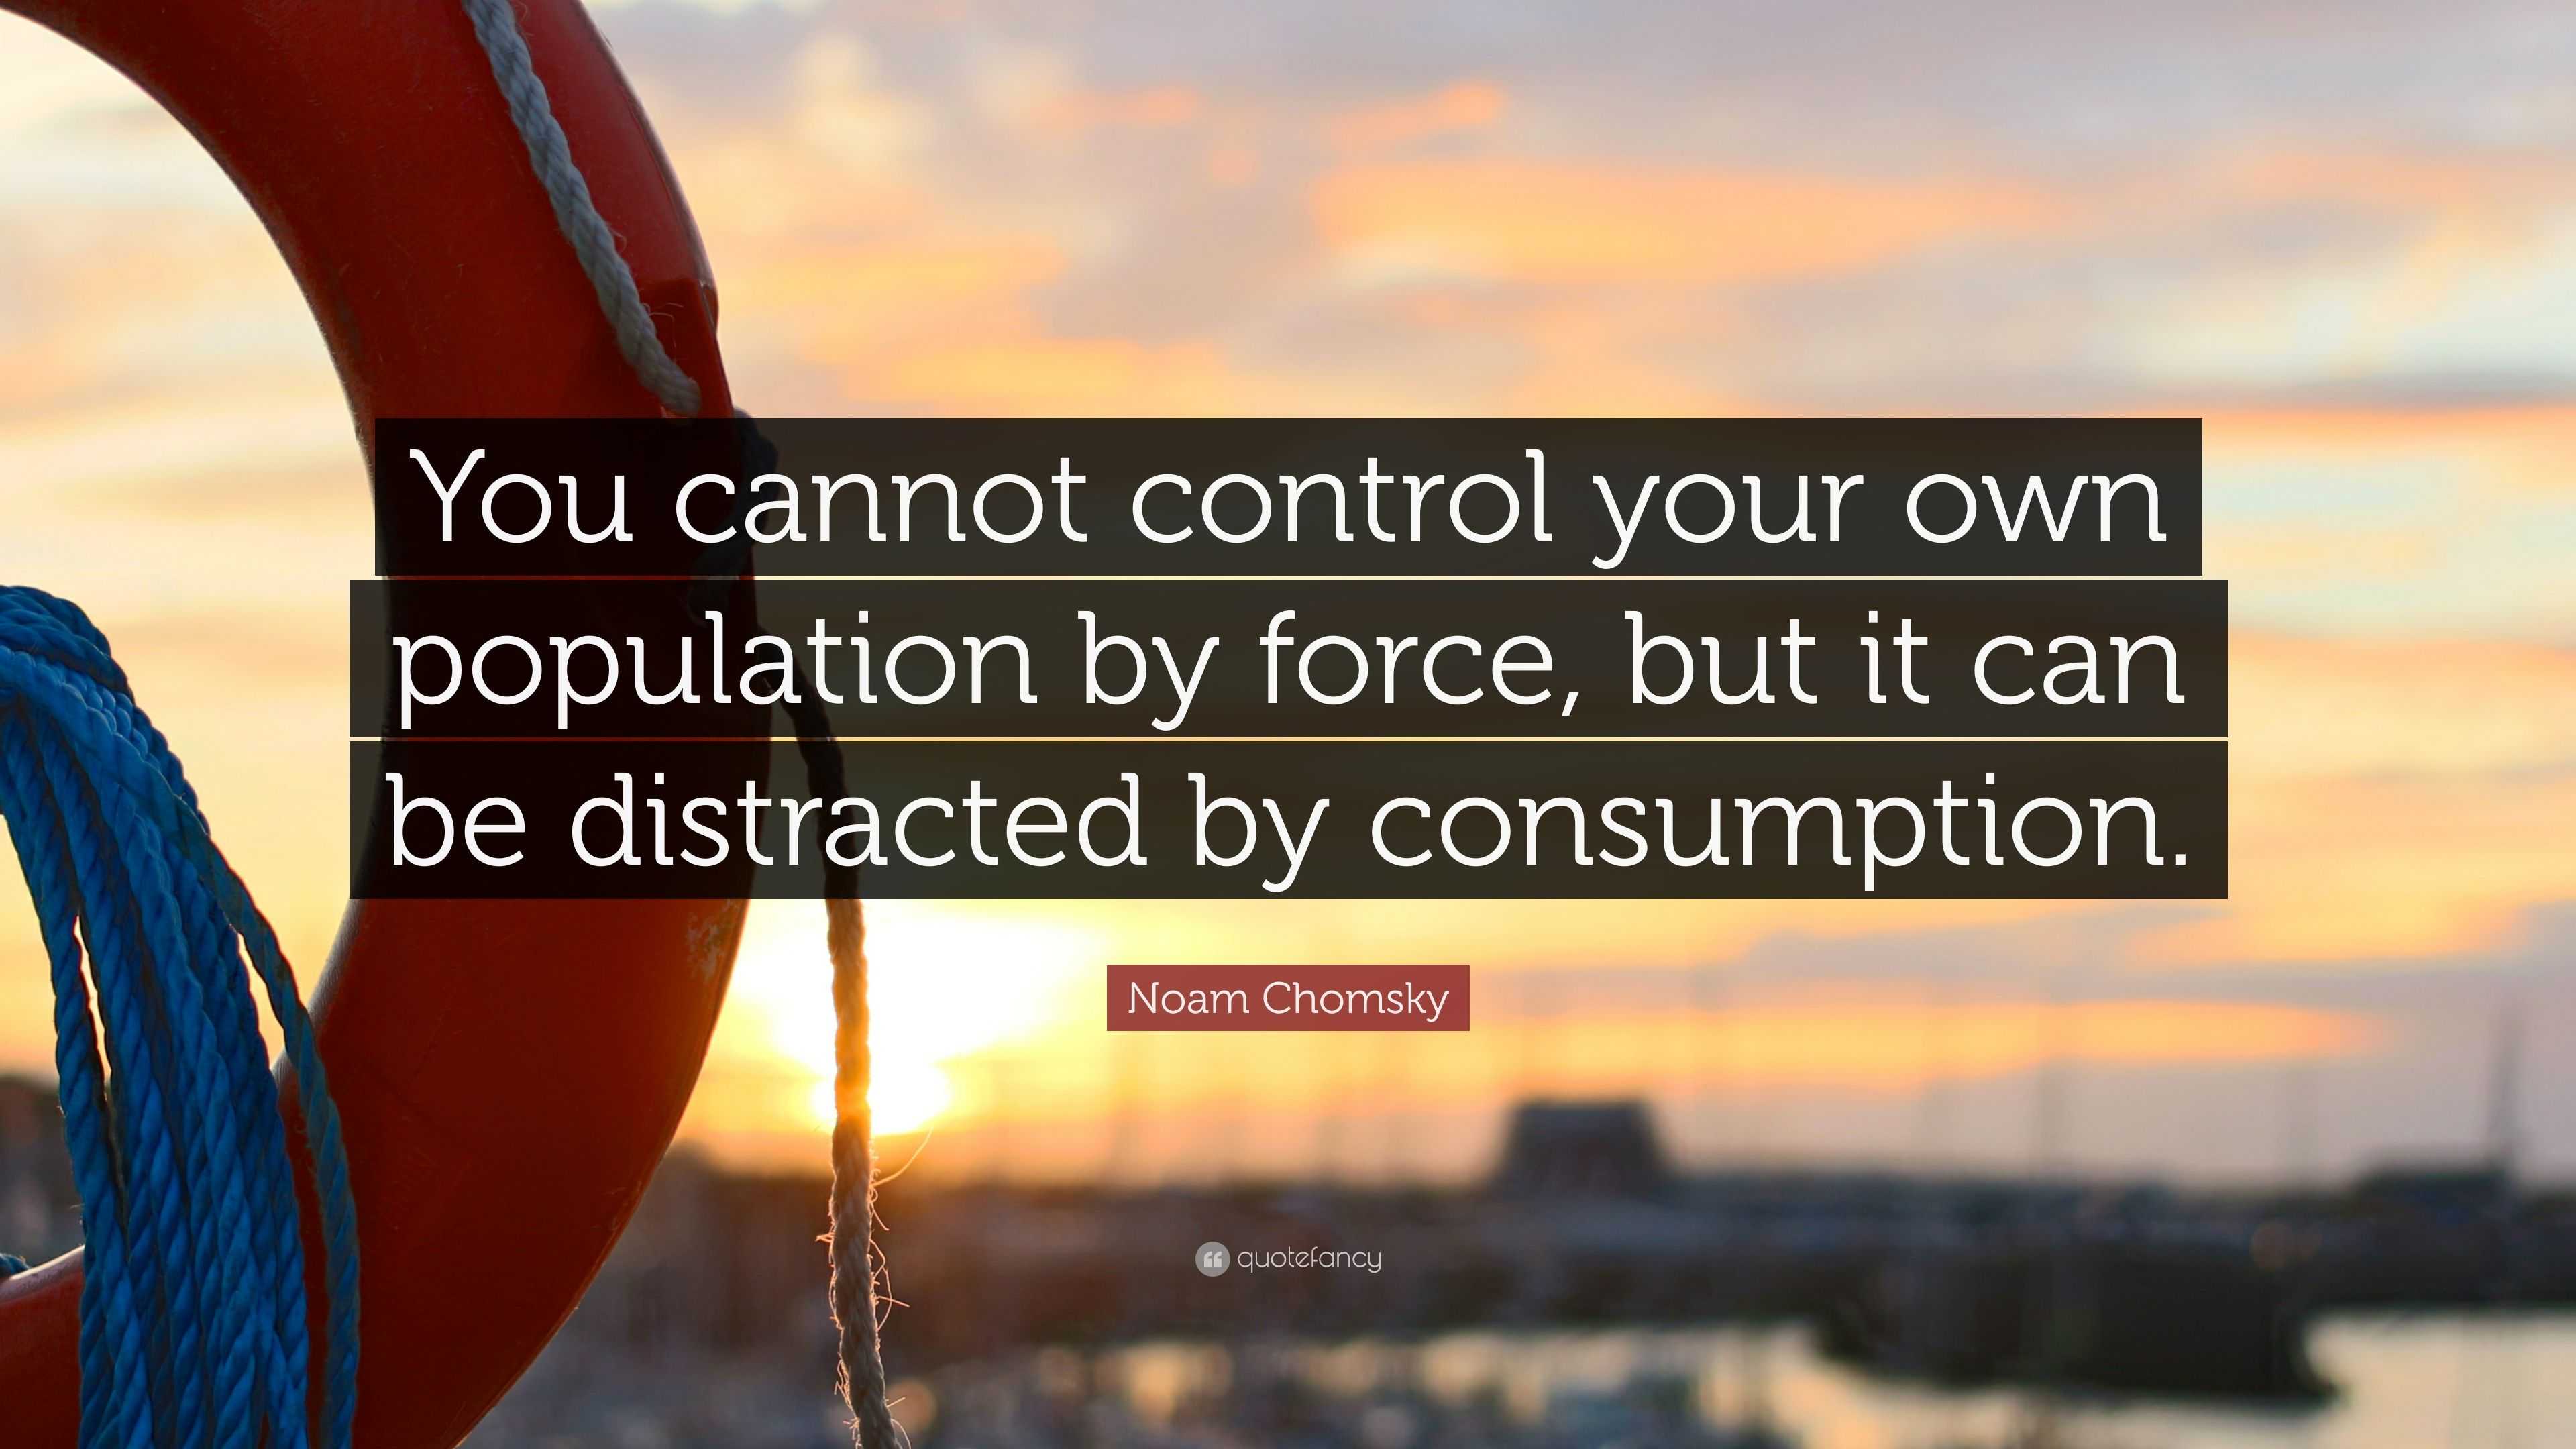 Noam Chomsky Quote “you Cannot Control Your Own Population By Force But It Can Be Distracted